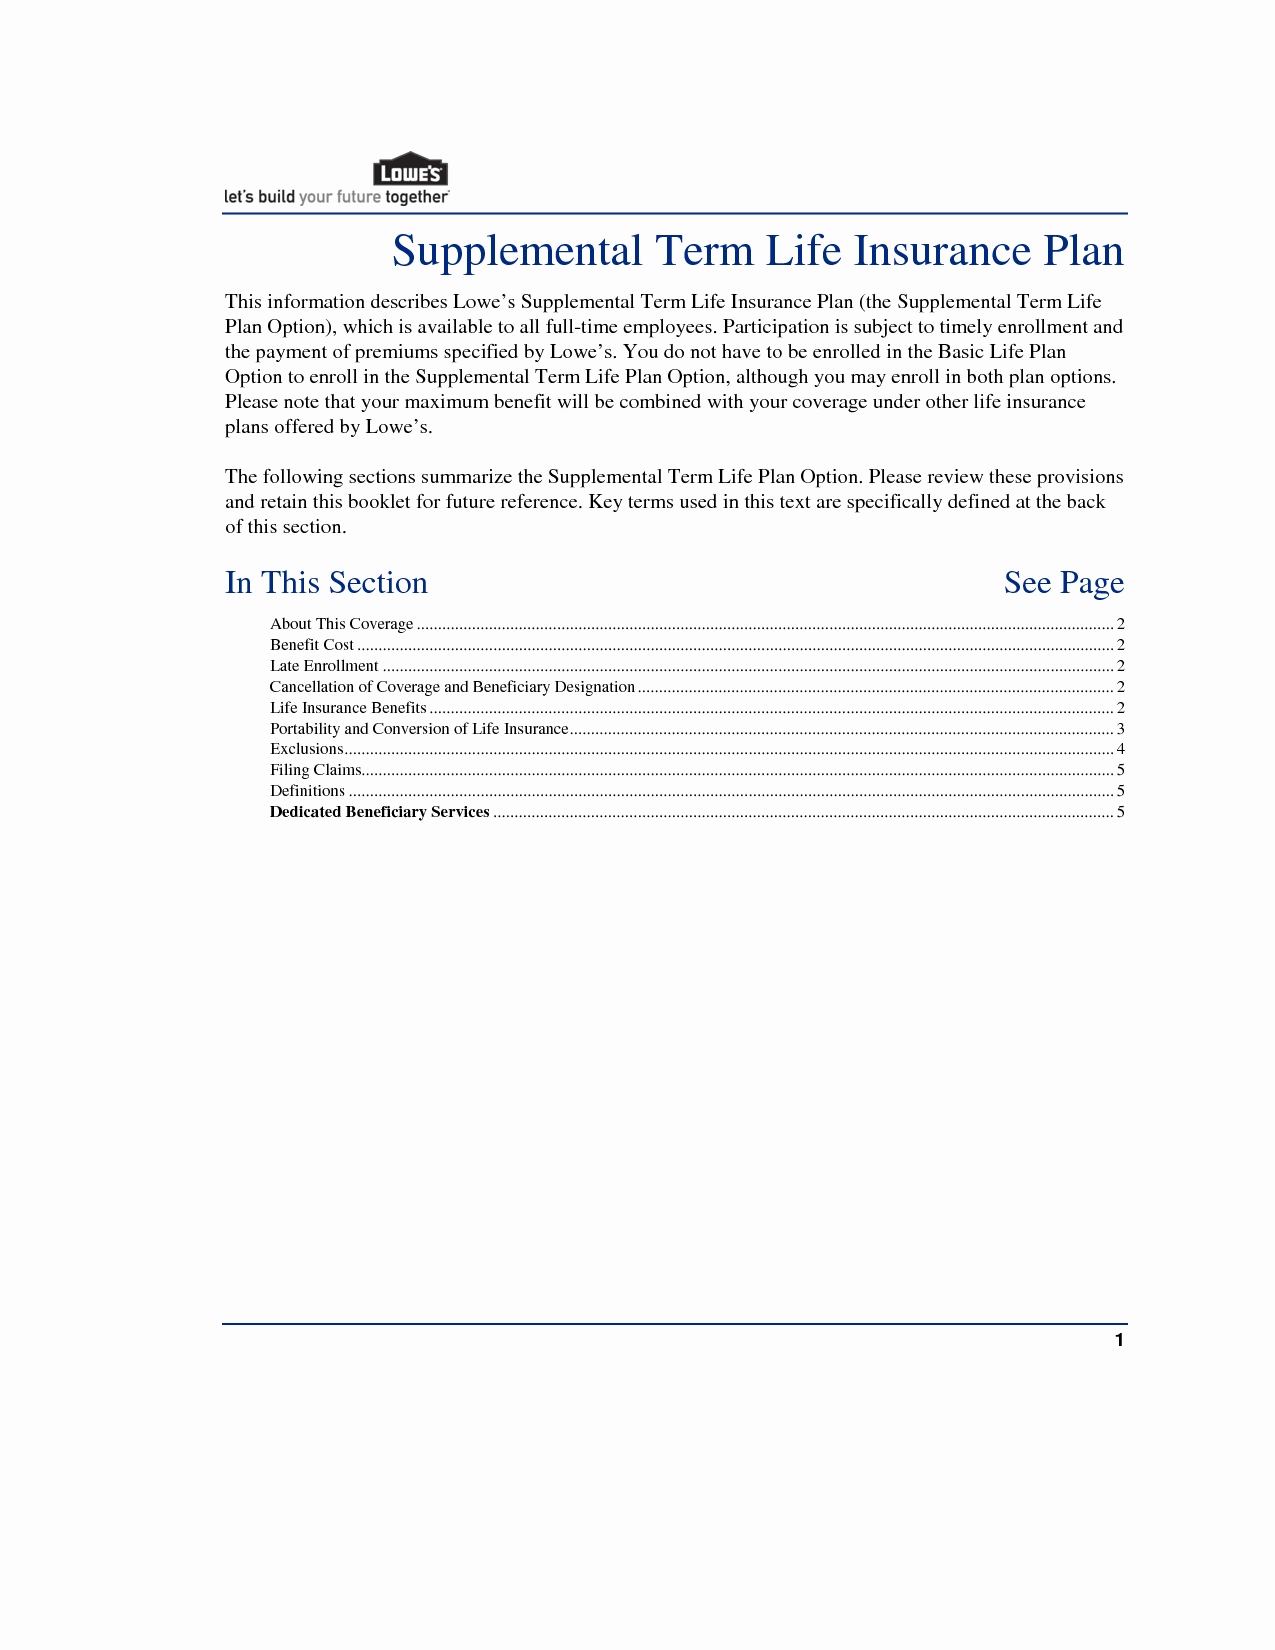 How To Fill Out A Resume Sample Progressive Insurance Fax Cover Sheet 1 how to fill out a resume|wikiresume.com